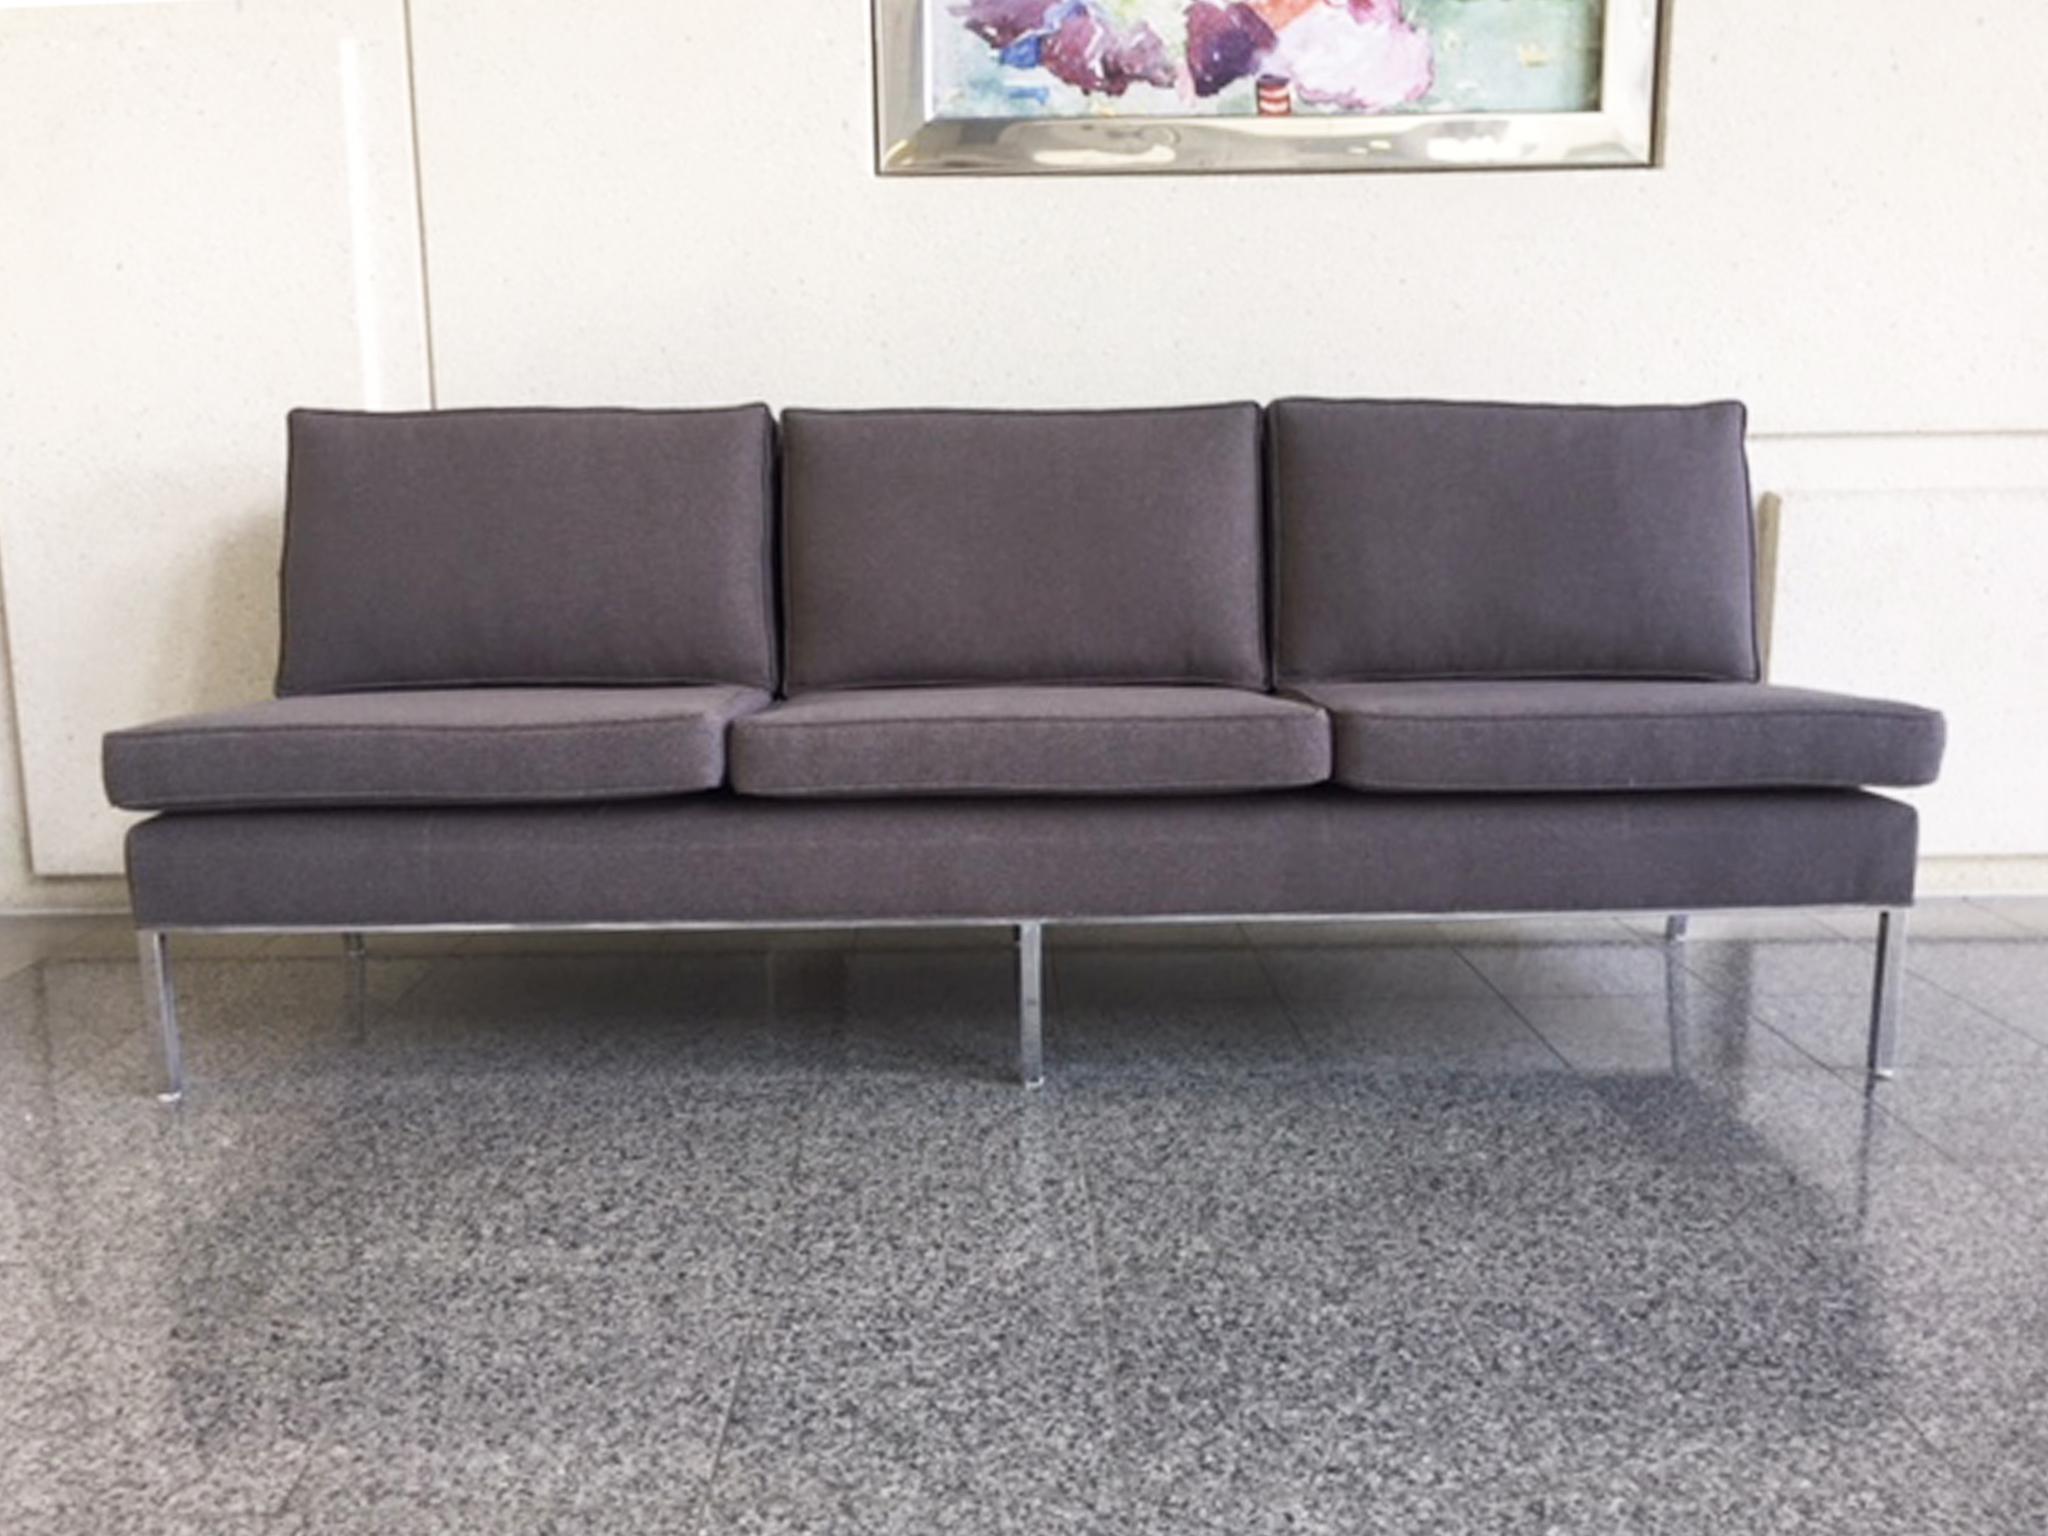 American Midcentury Florence Knoll Armless Sofas, a Pair